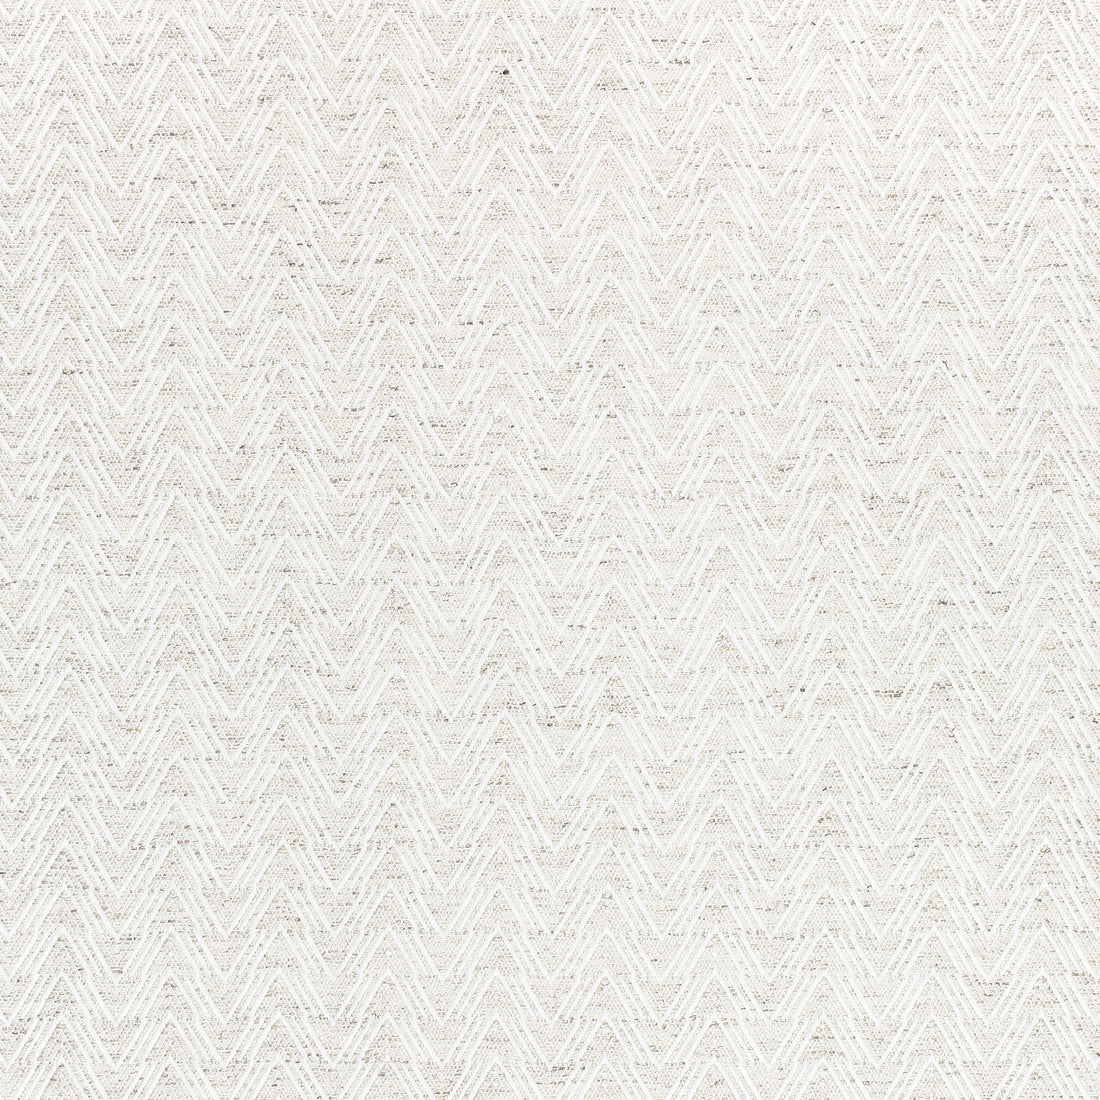 Gatsby fabric in oyster color - pattern number W80646 - by Thibaut in the Pinnacle collection